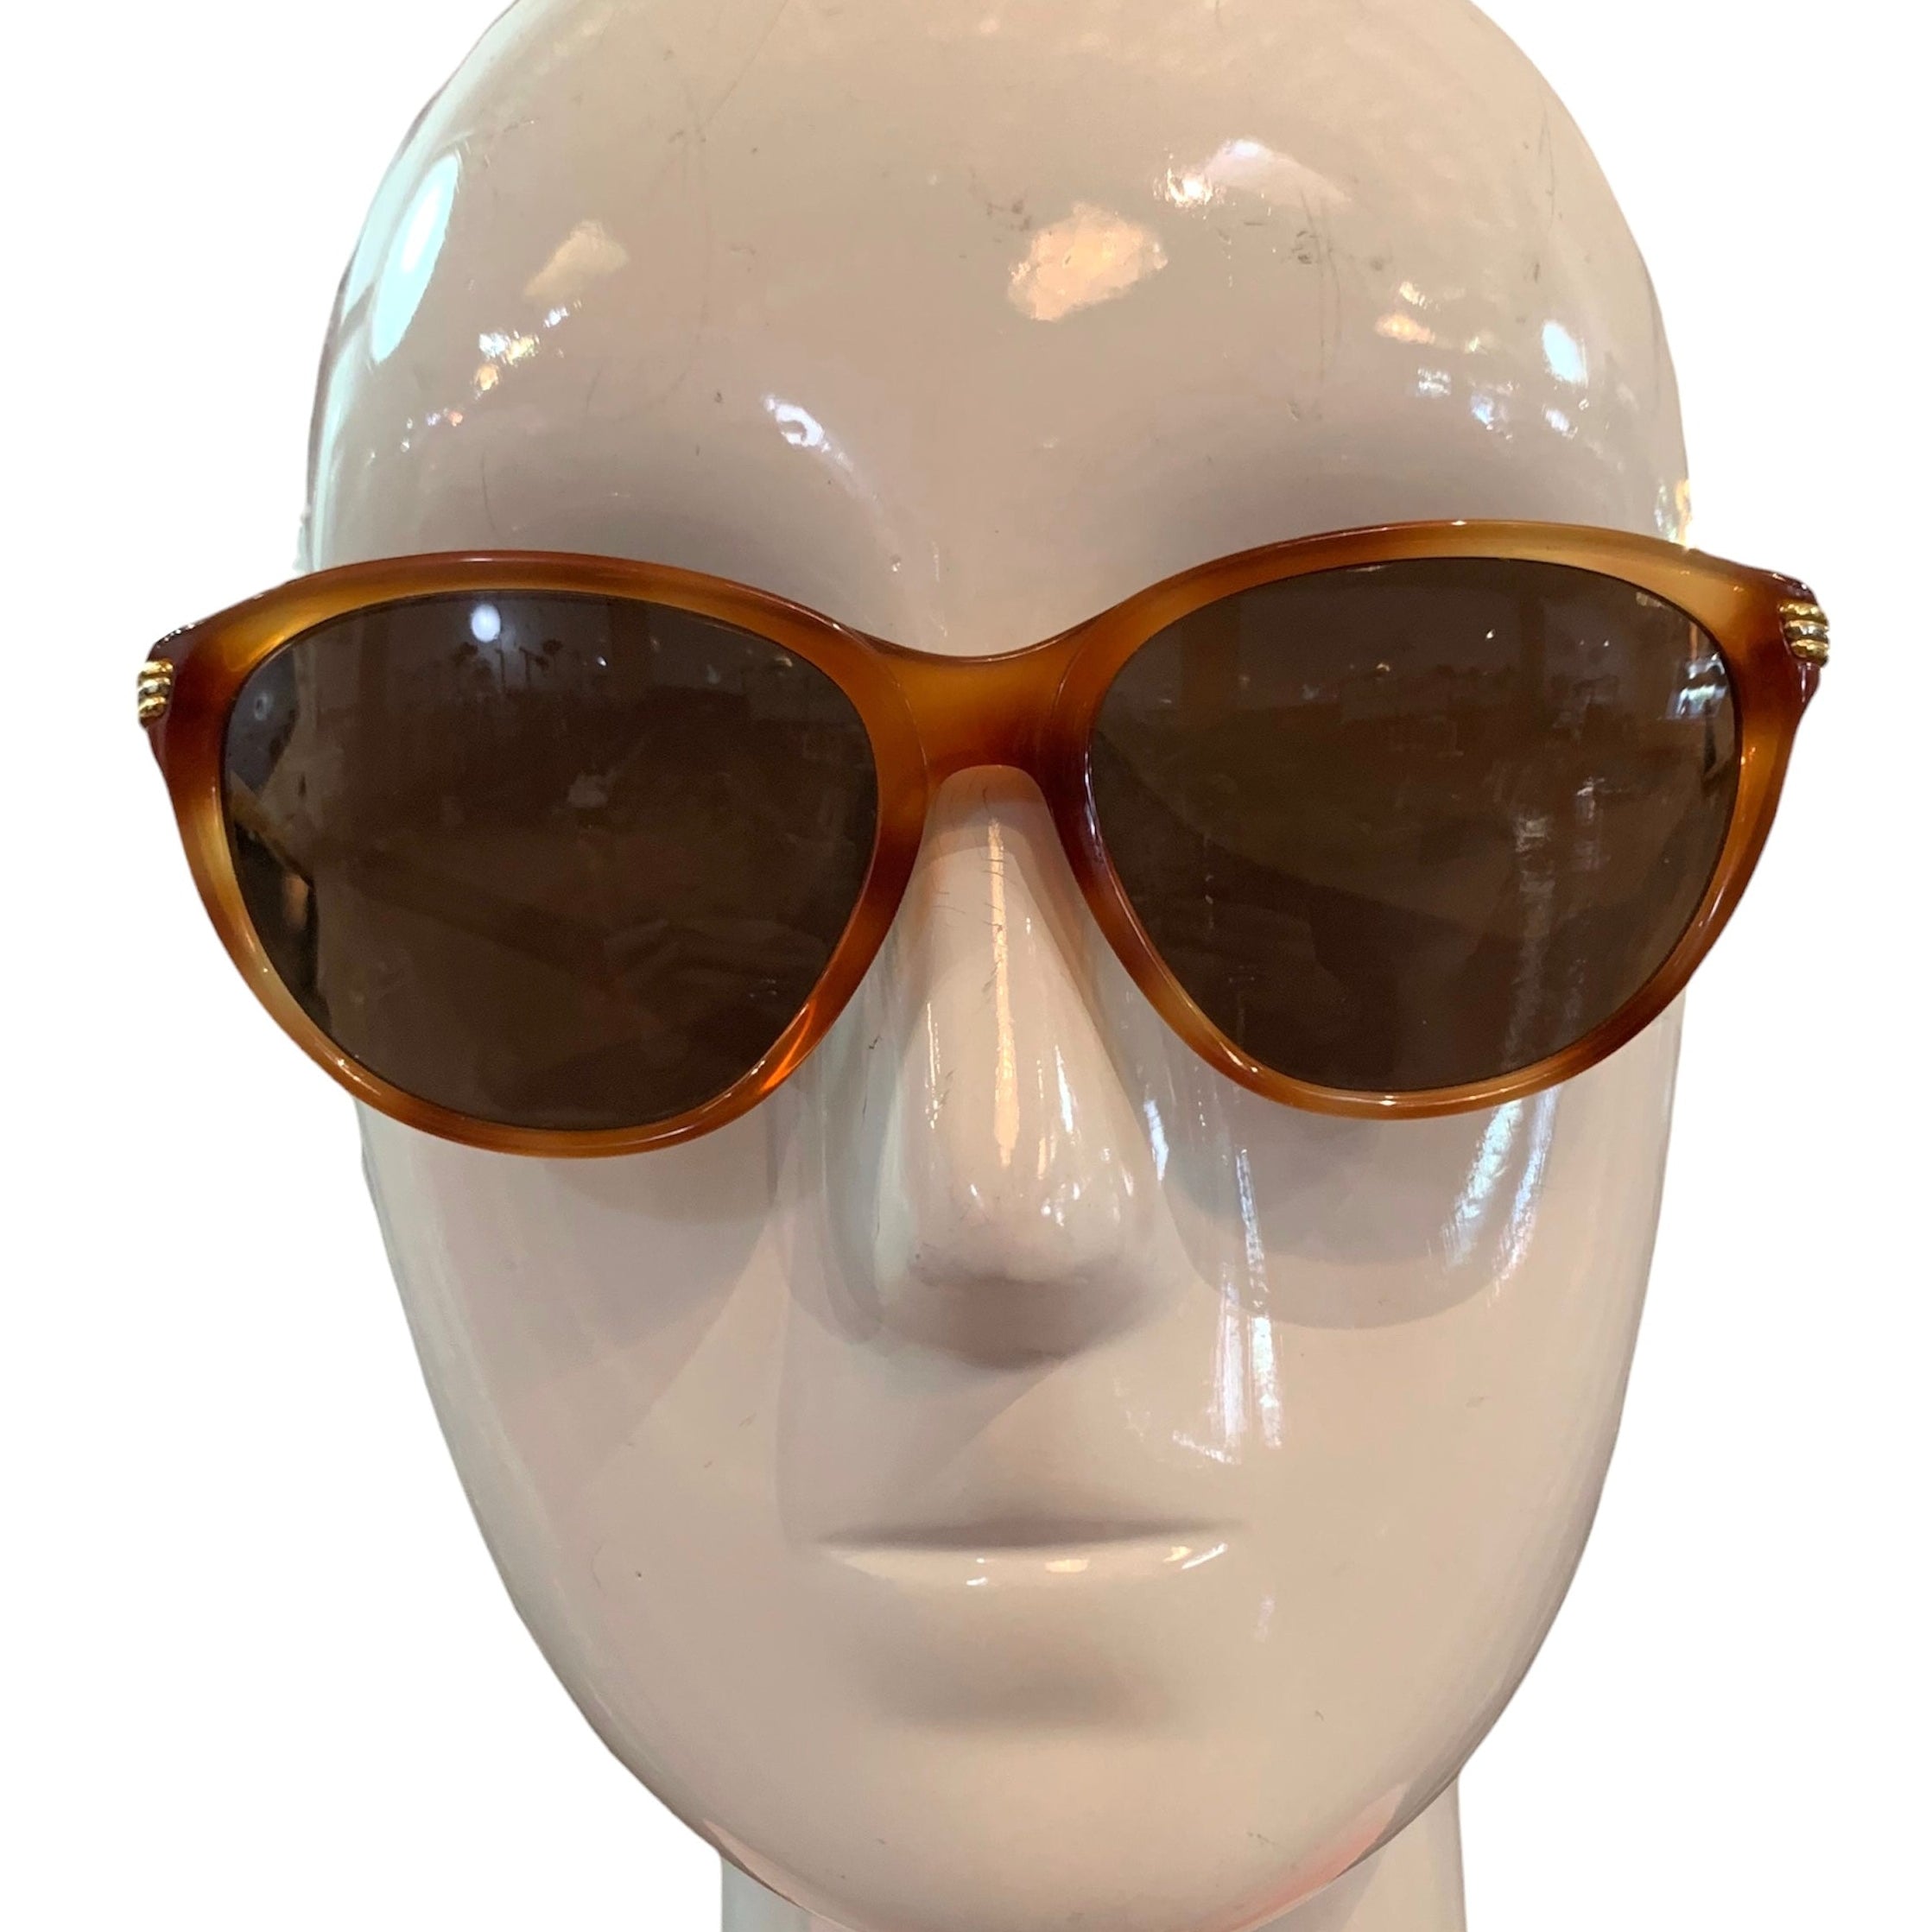   Cartier  90s Gold Plated Tortoiseshell Sunglasses  FRONT 2 of 6